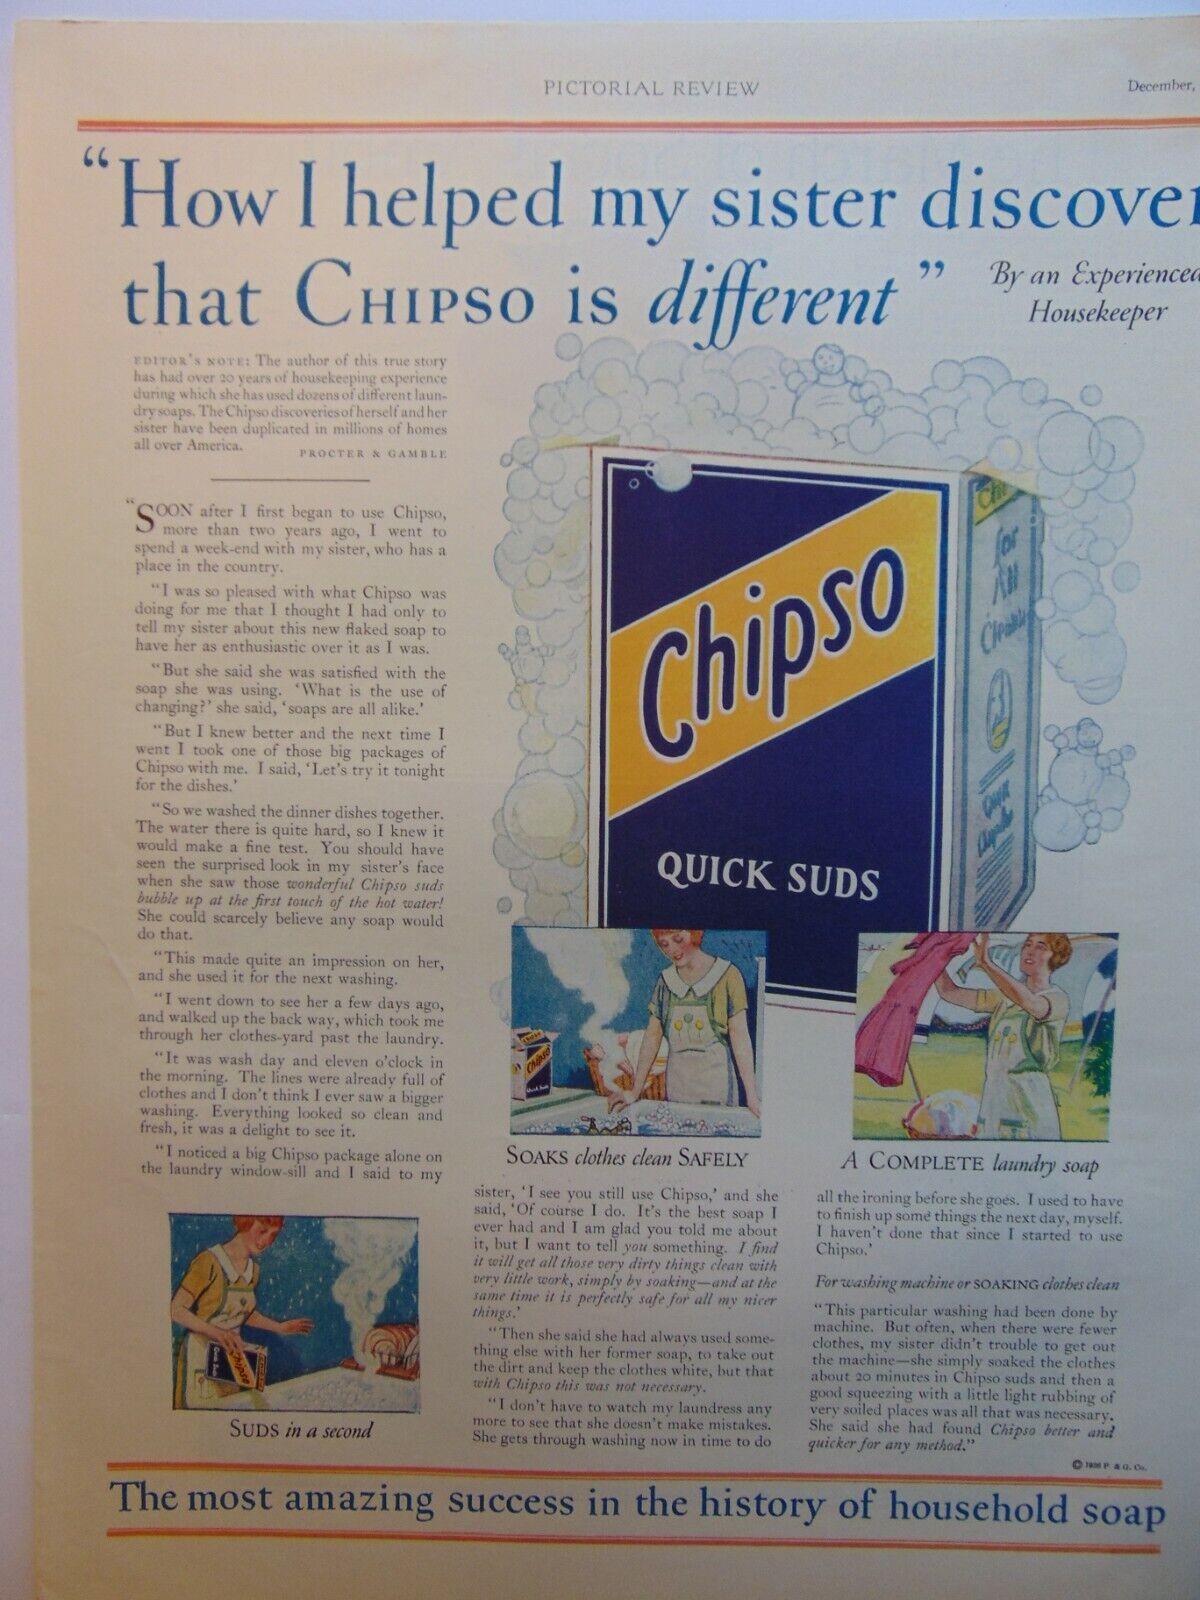 1926 CHIPSO SOAP QUICK SUDS vintage art print ad